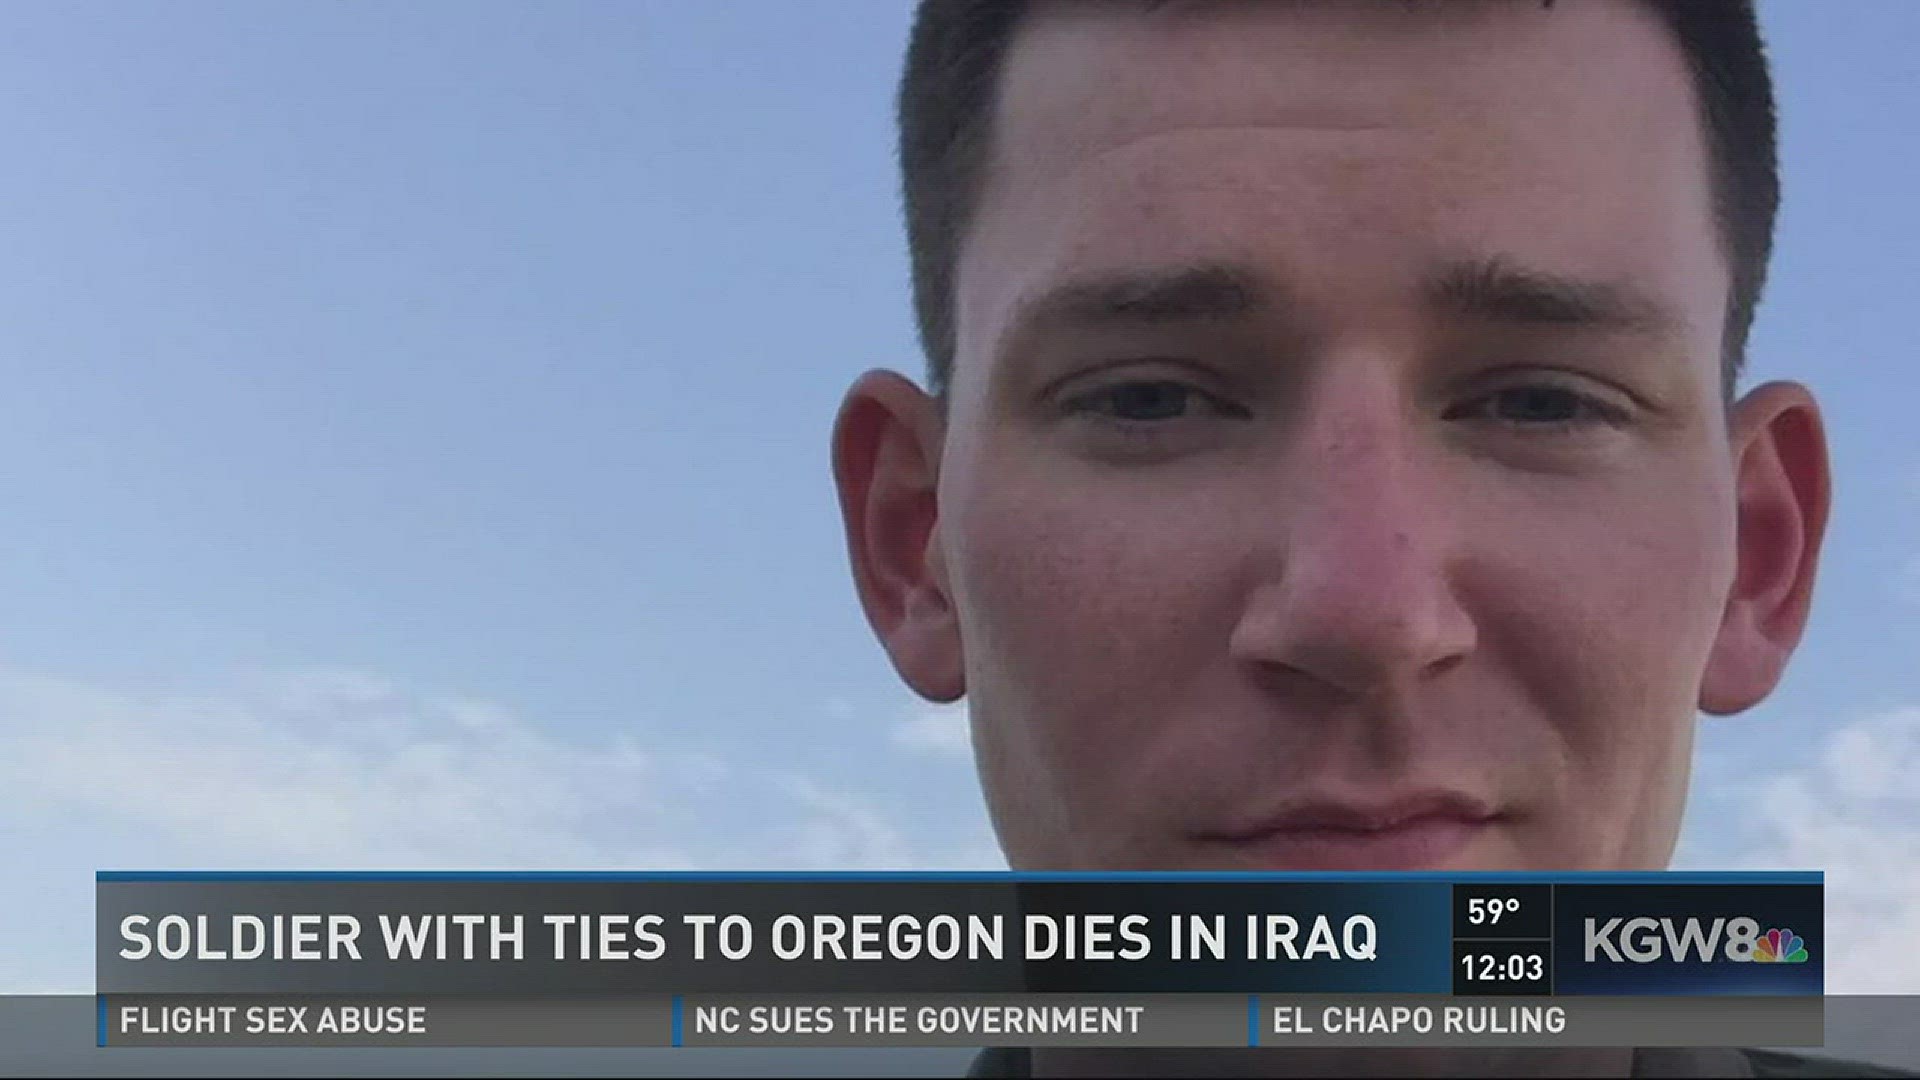 Soldier with ties to Oregon dies in Iraq